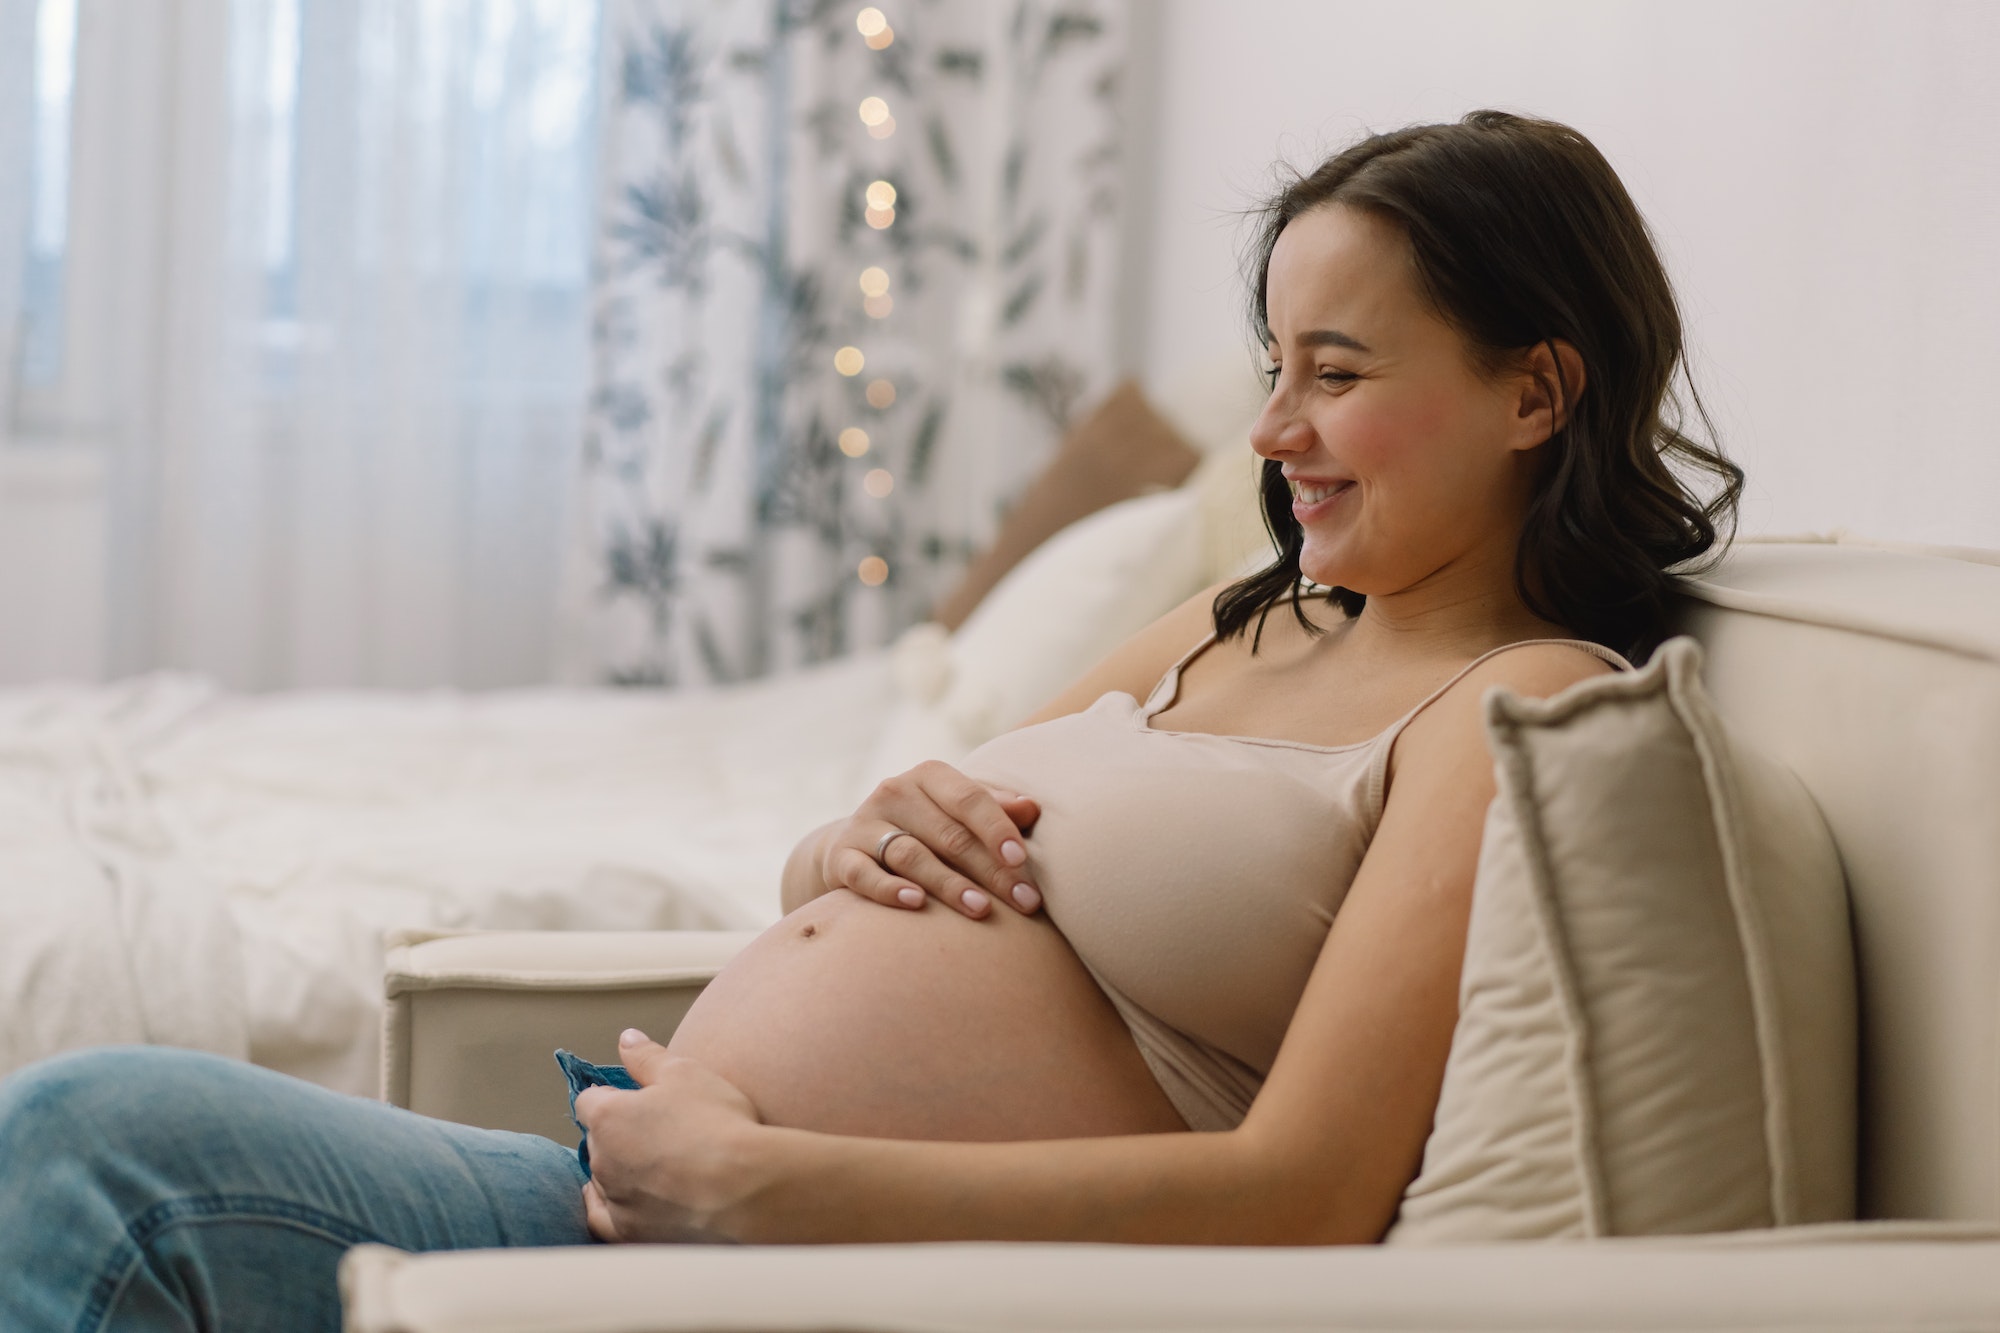 Attractive pregnant woman is sitting in armchair and holding her belly. Last months of pregnancy.